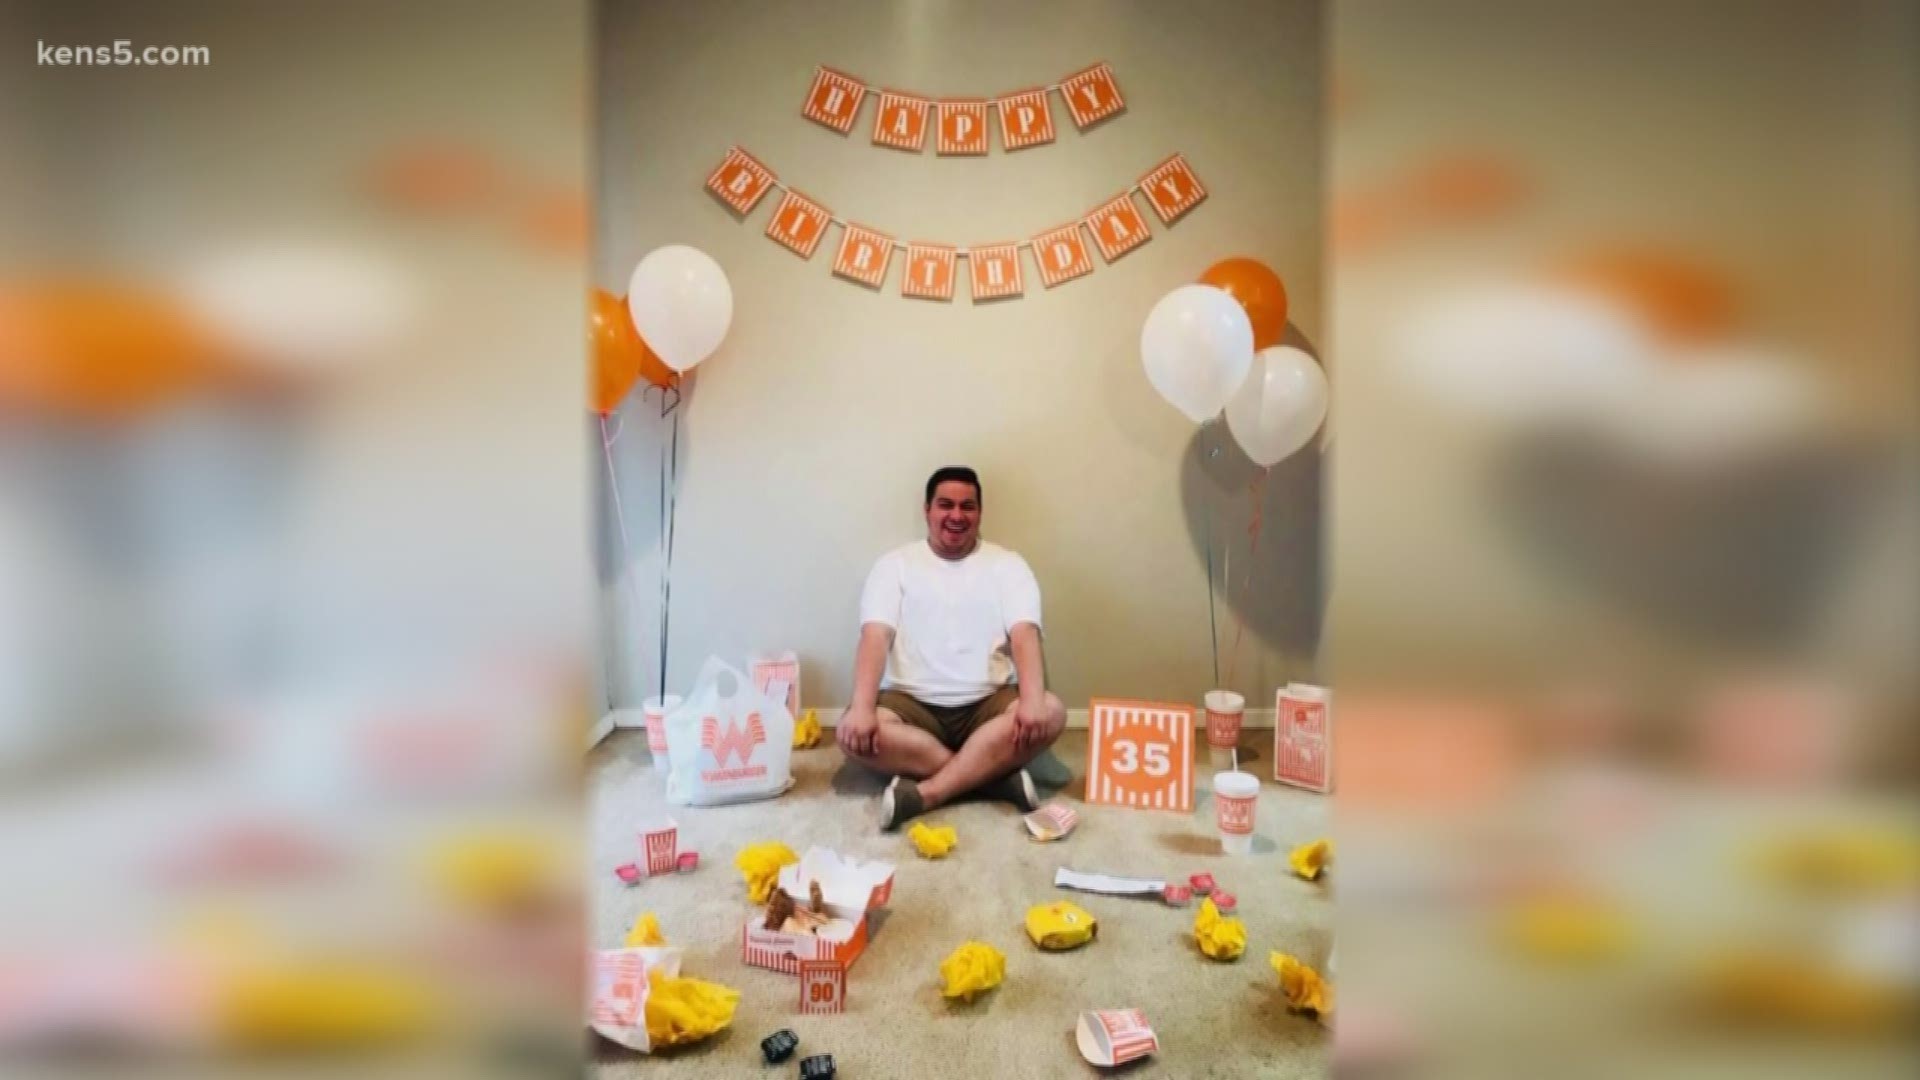 Who says only kids can have themed birthday parties?! Hector Cuellar Jr. celebrated his 35th birthday with a Whataburger photoshoot.